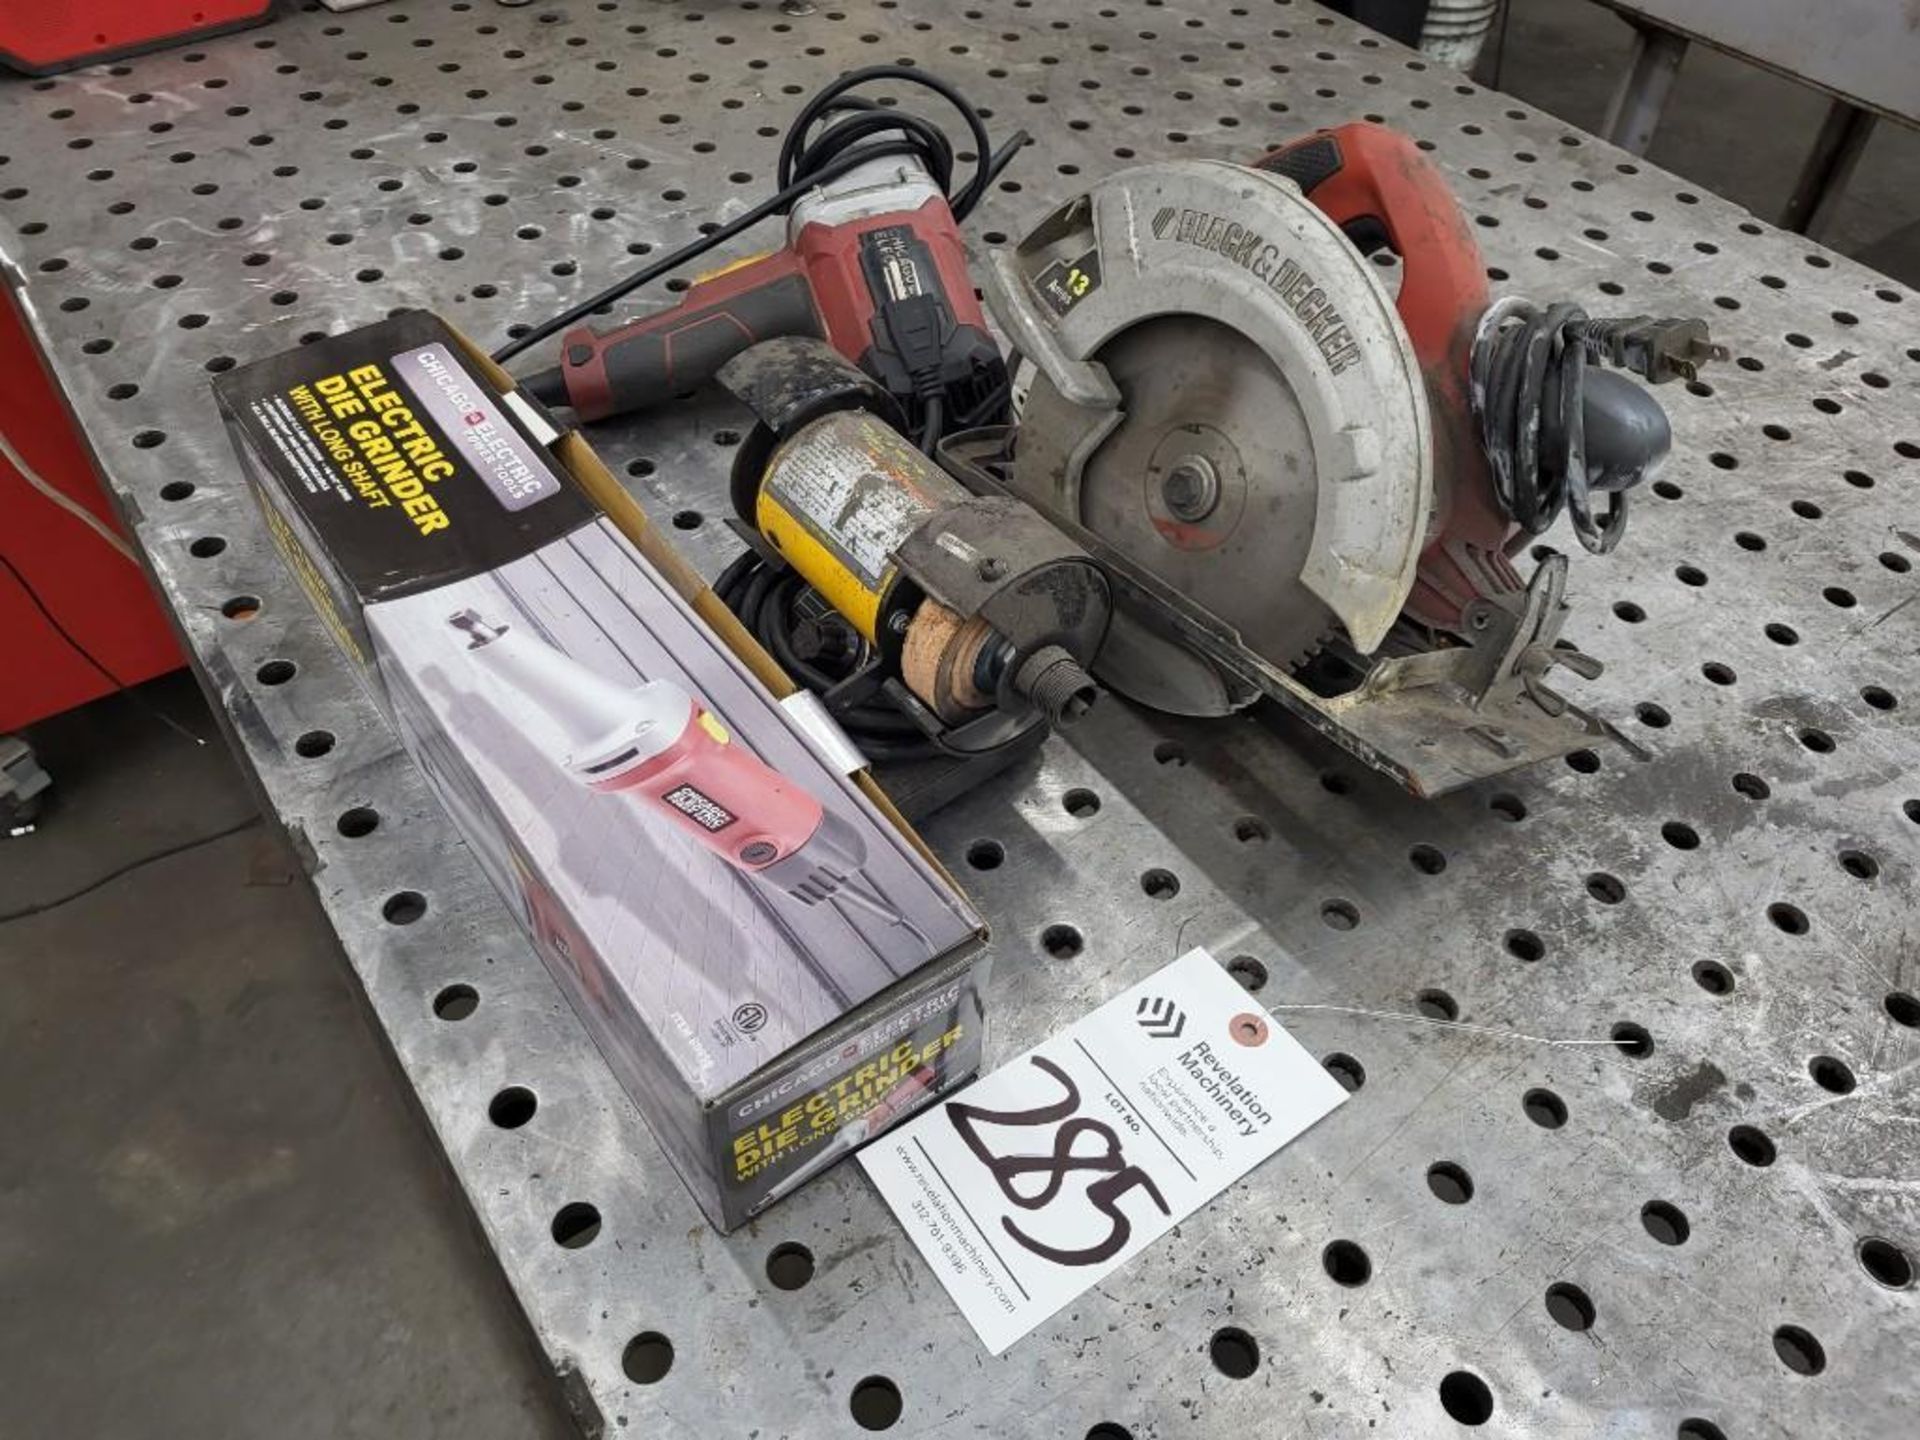 LOT OF CHICAGO ELECTRIC DIE GRINDER, BLACK AND DECKER GRINDER, CHICAGO 1/2" IMPACT WRENCH - Image 2 of 7